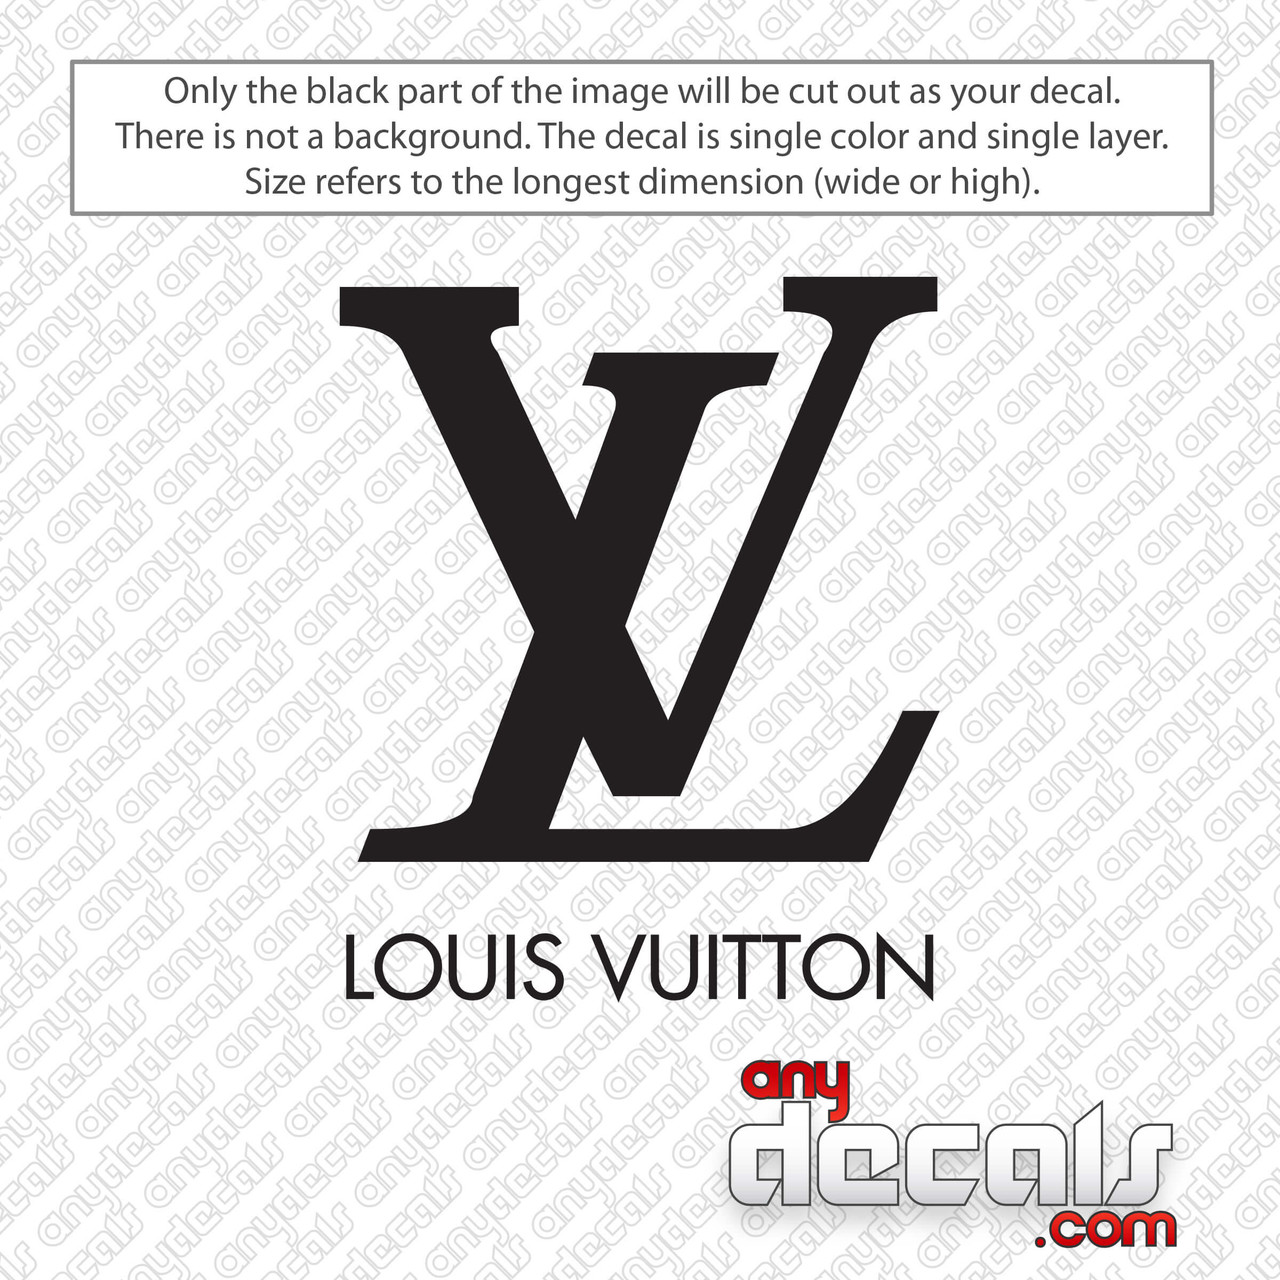 Louis Vuitton Logo With Text Decal Sticker